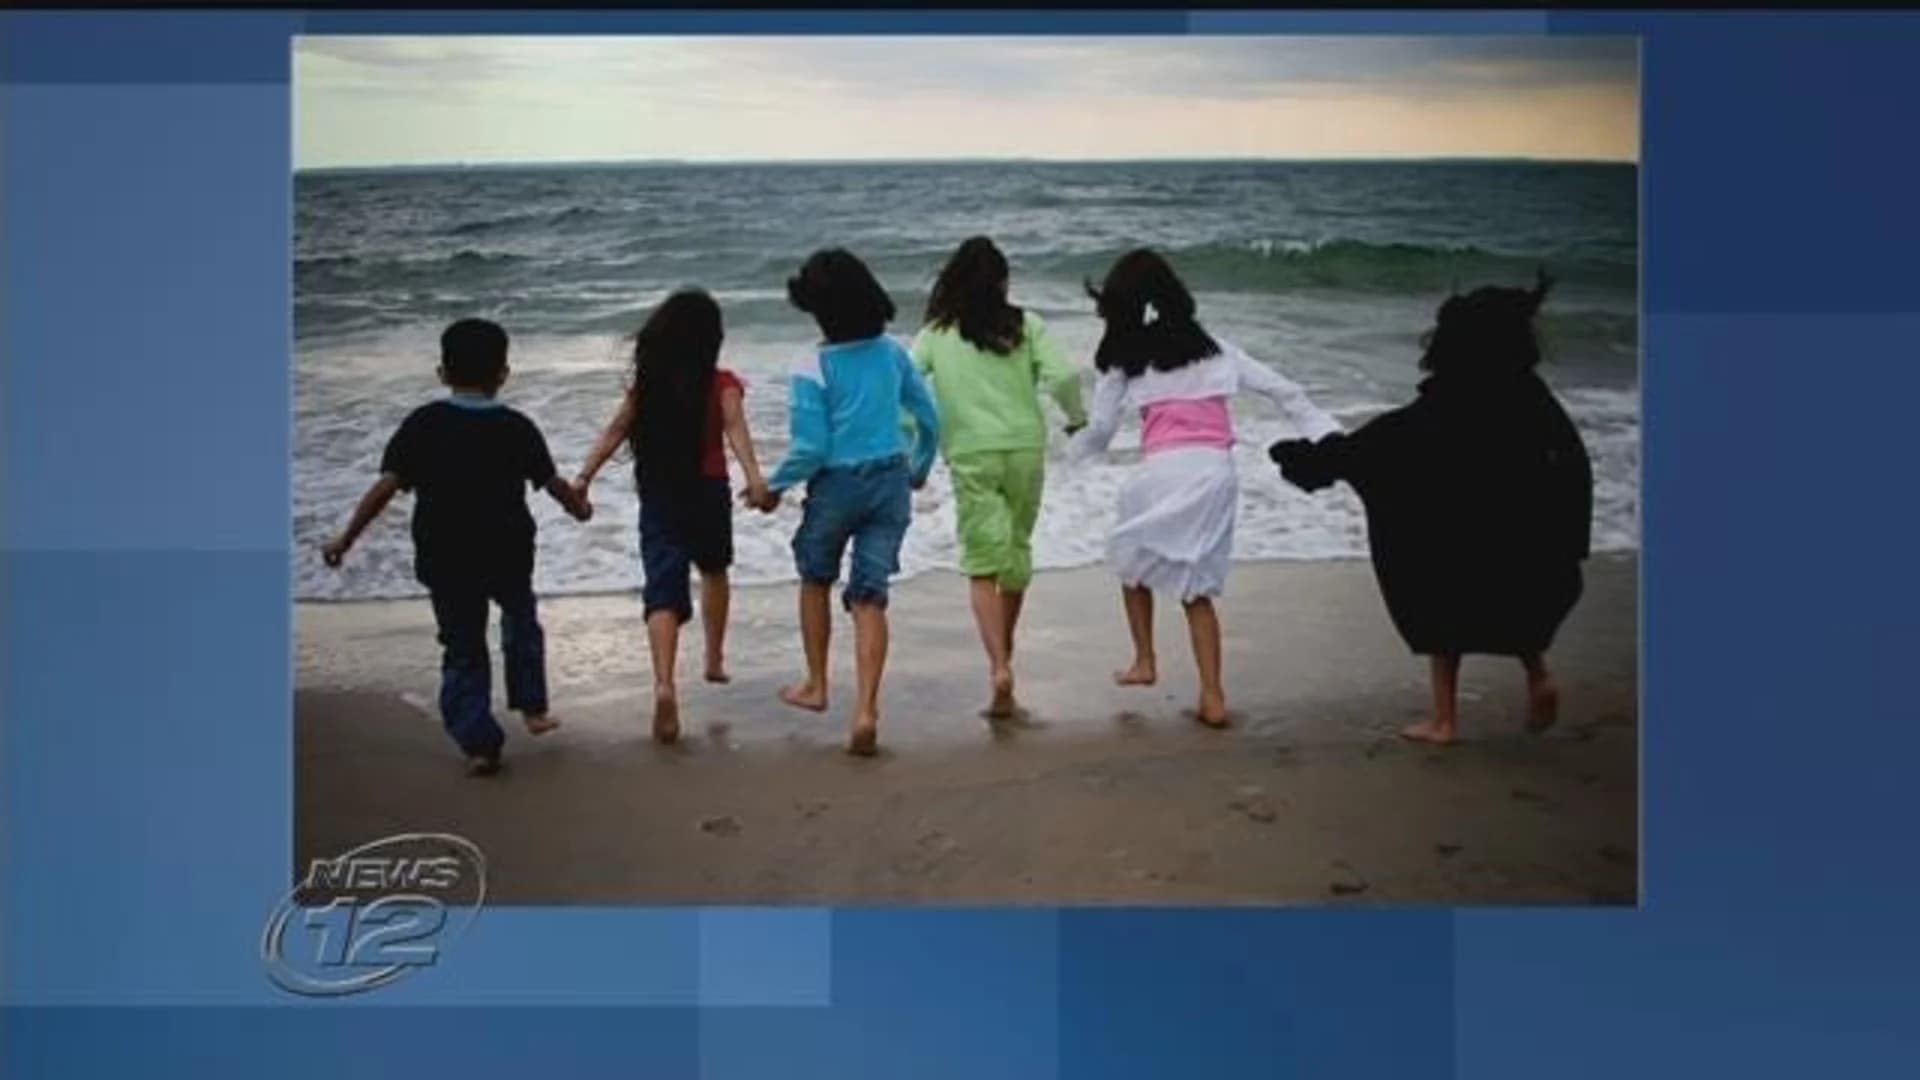 NJ woman raises funds to let the underprivileged go to the beach